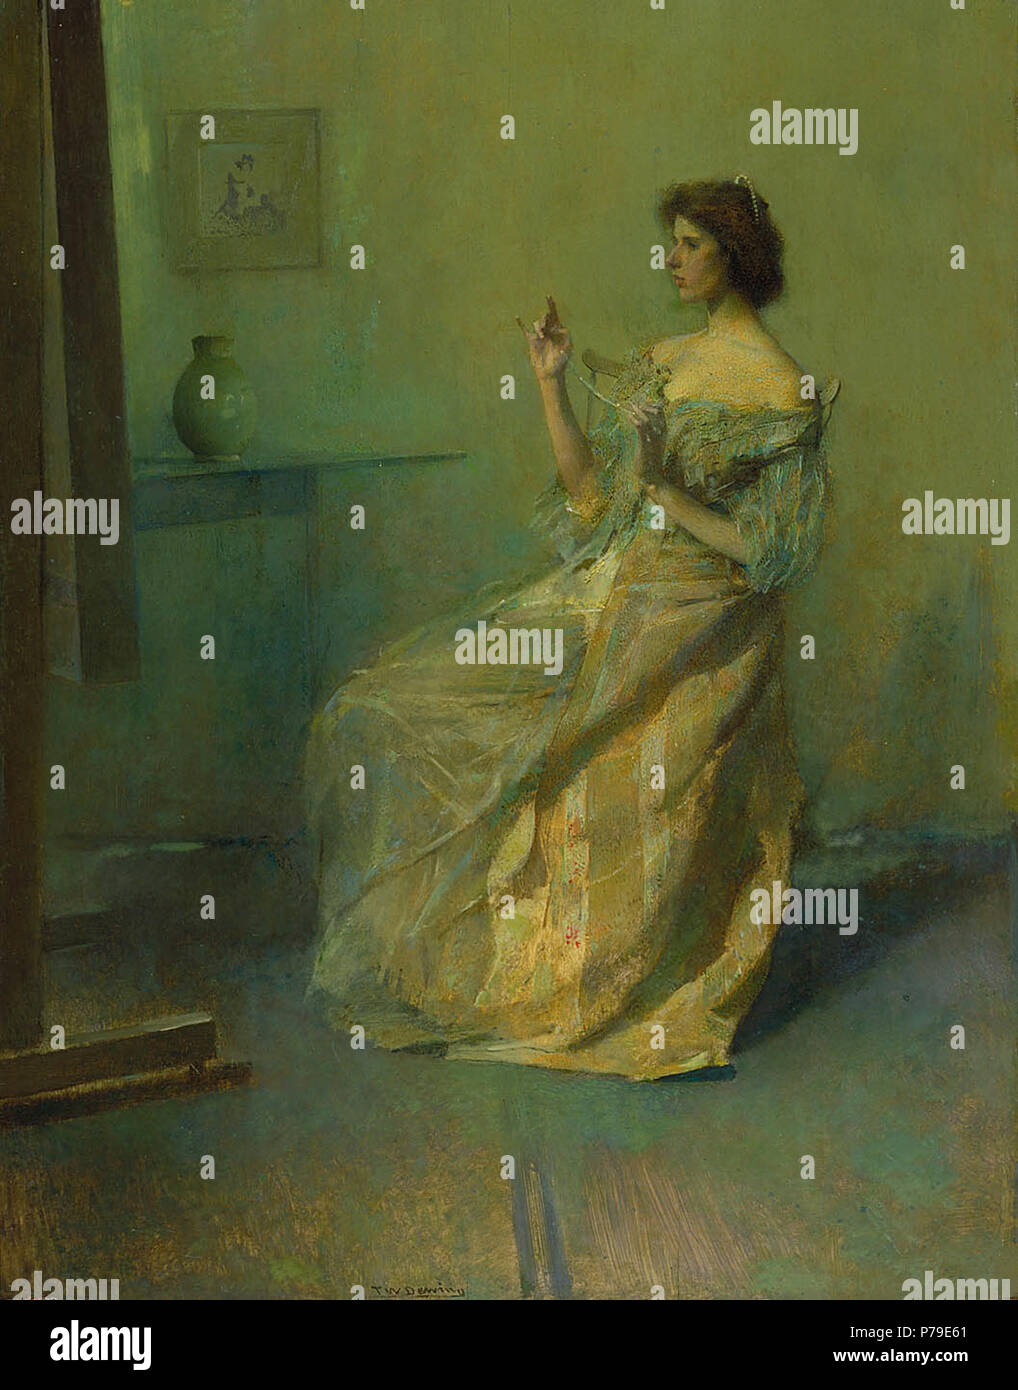 Thomas Dewing: The Necklace oil on wood 20 x 15 3/4 in. (50.7 x 39.9 cm) Smithsonian American Art Museum Gift of John Gellatly 1929.6.40 Smithsonian American Art Museum, 2nd Floor, East Wing . circa 1907 53 Thomas Wilmer Dewing - The Necklace - ca. 1907 Stock Photo